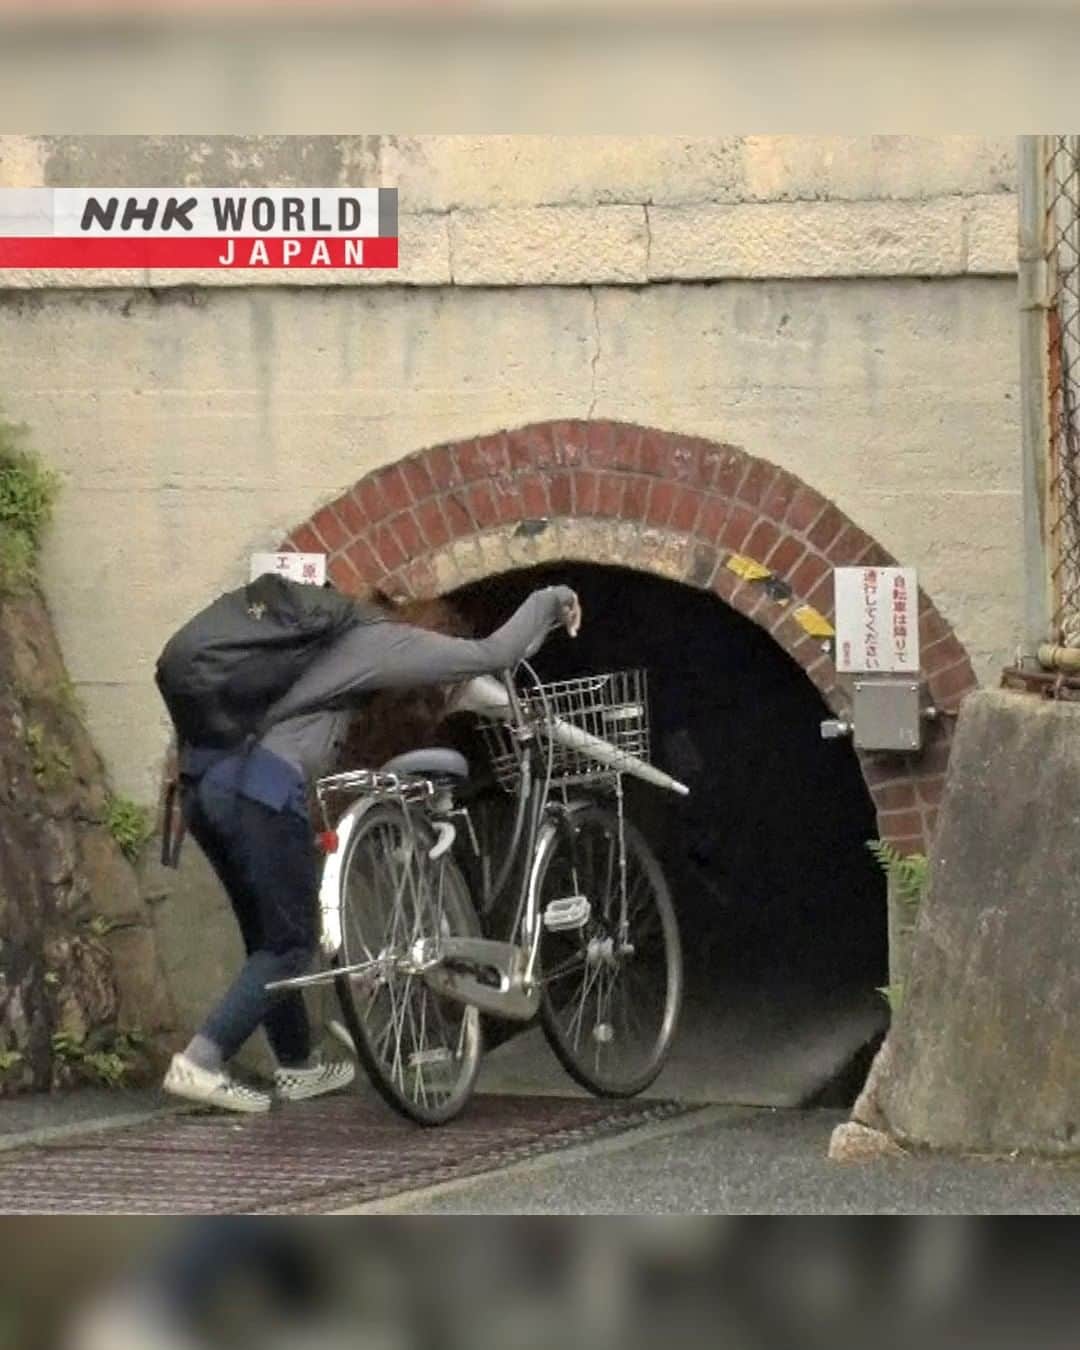 NHK「WORLD-JAPAN」のインスタグラム：「How tiny is this tunnel? 👀  Just 1.3 meters high, it’s nicknamed the ‘Manbow Tunnel' and is down the road from the home stadium of the Hanshin Tigers baseball team.⚾  Trains on the JR Kobe railway line rumble overhead as locals stoop to walk its 25-meter-length.🚇 . 👉Meet the people who pass through it to the light on the other side｜Watch｜72 Hours: Nishinomiya's "Manbow Tunnel" Under the Tracks｜Free On Demand｜NHK WORLD-JAPAN website.👀 . 👉Tap in Stories/Highlights to get there.👆 . 👉See the link in our bio for more on the latest from Japan. . 👉If we’re on your Favorites list you won’t miss a post. . . #localstories #secretjapan #hiddenjapan #japantrain #japaneserailway #traintrack #traintunnel #secrettunnel #railwayline #trainhistory #japanrailway #train #baseball #localjapan #hanshintigers #nishinomiya #hyogo #72hours #discoverjapan #nhkworldjapan #japan」